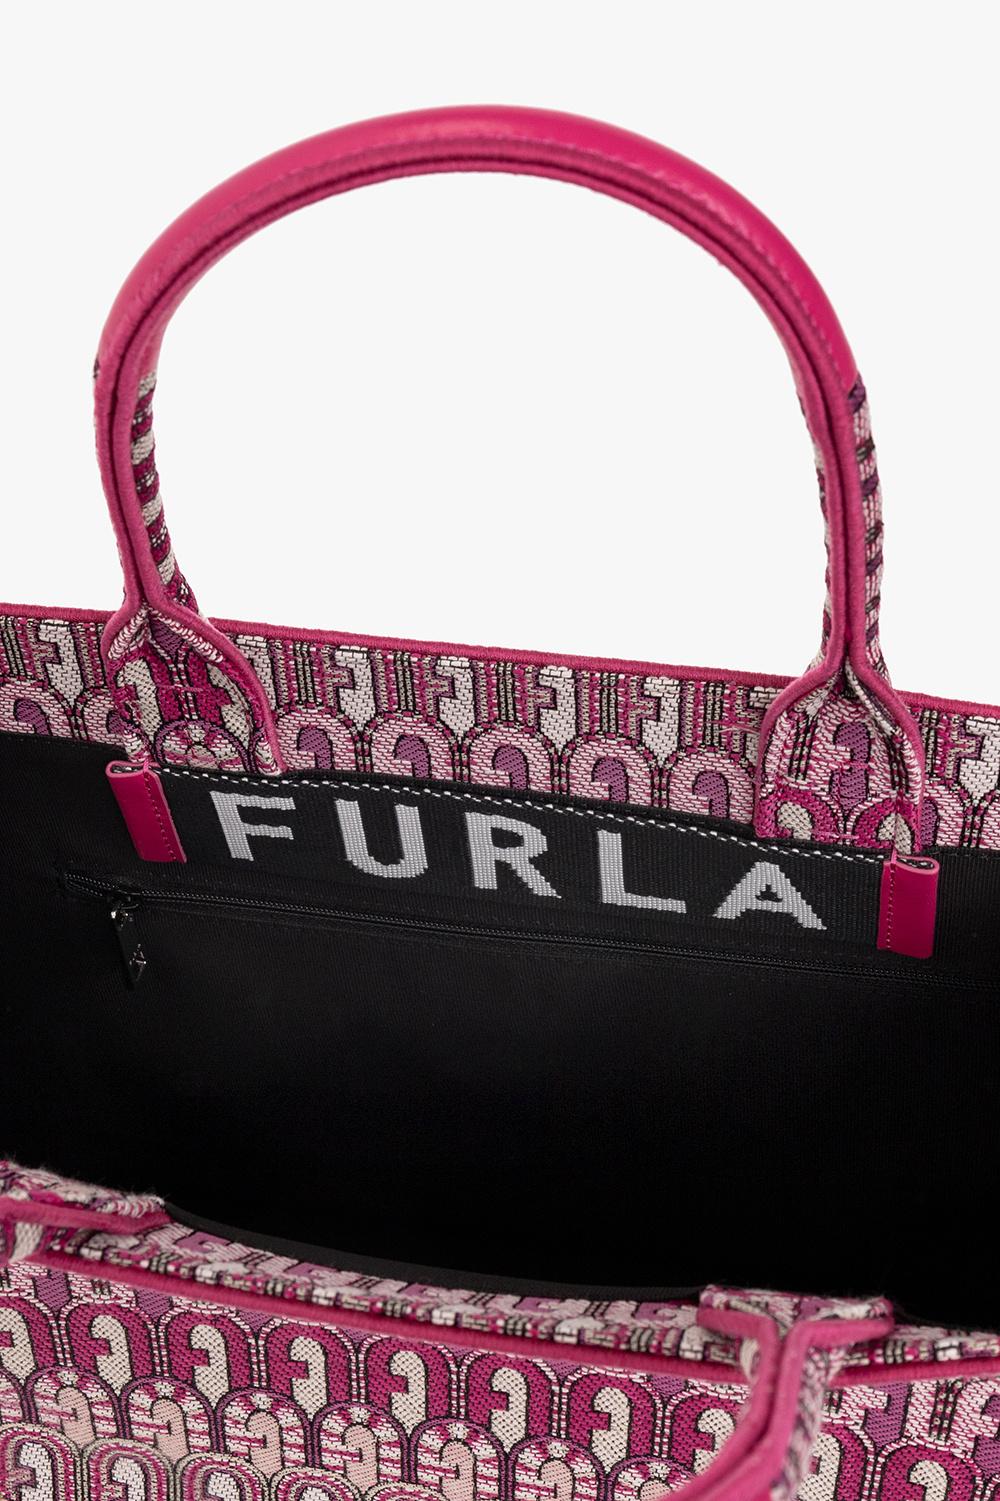 Furla Opportunity Jacquard Tote Bag - Pink